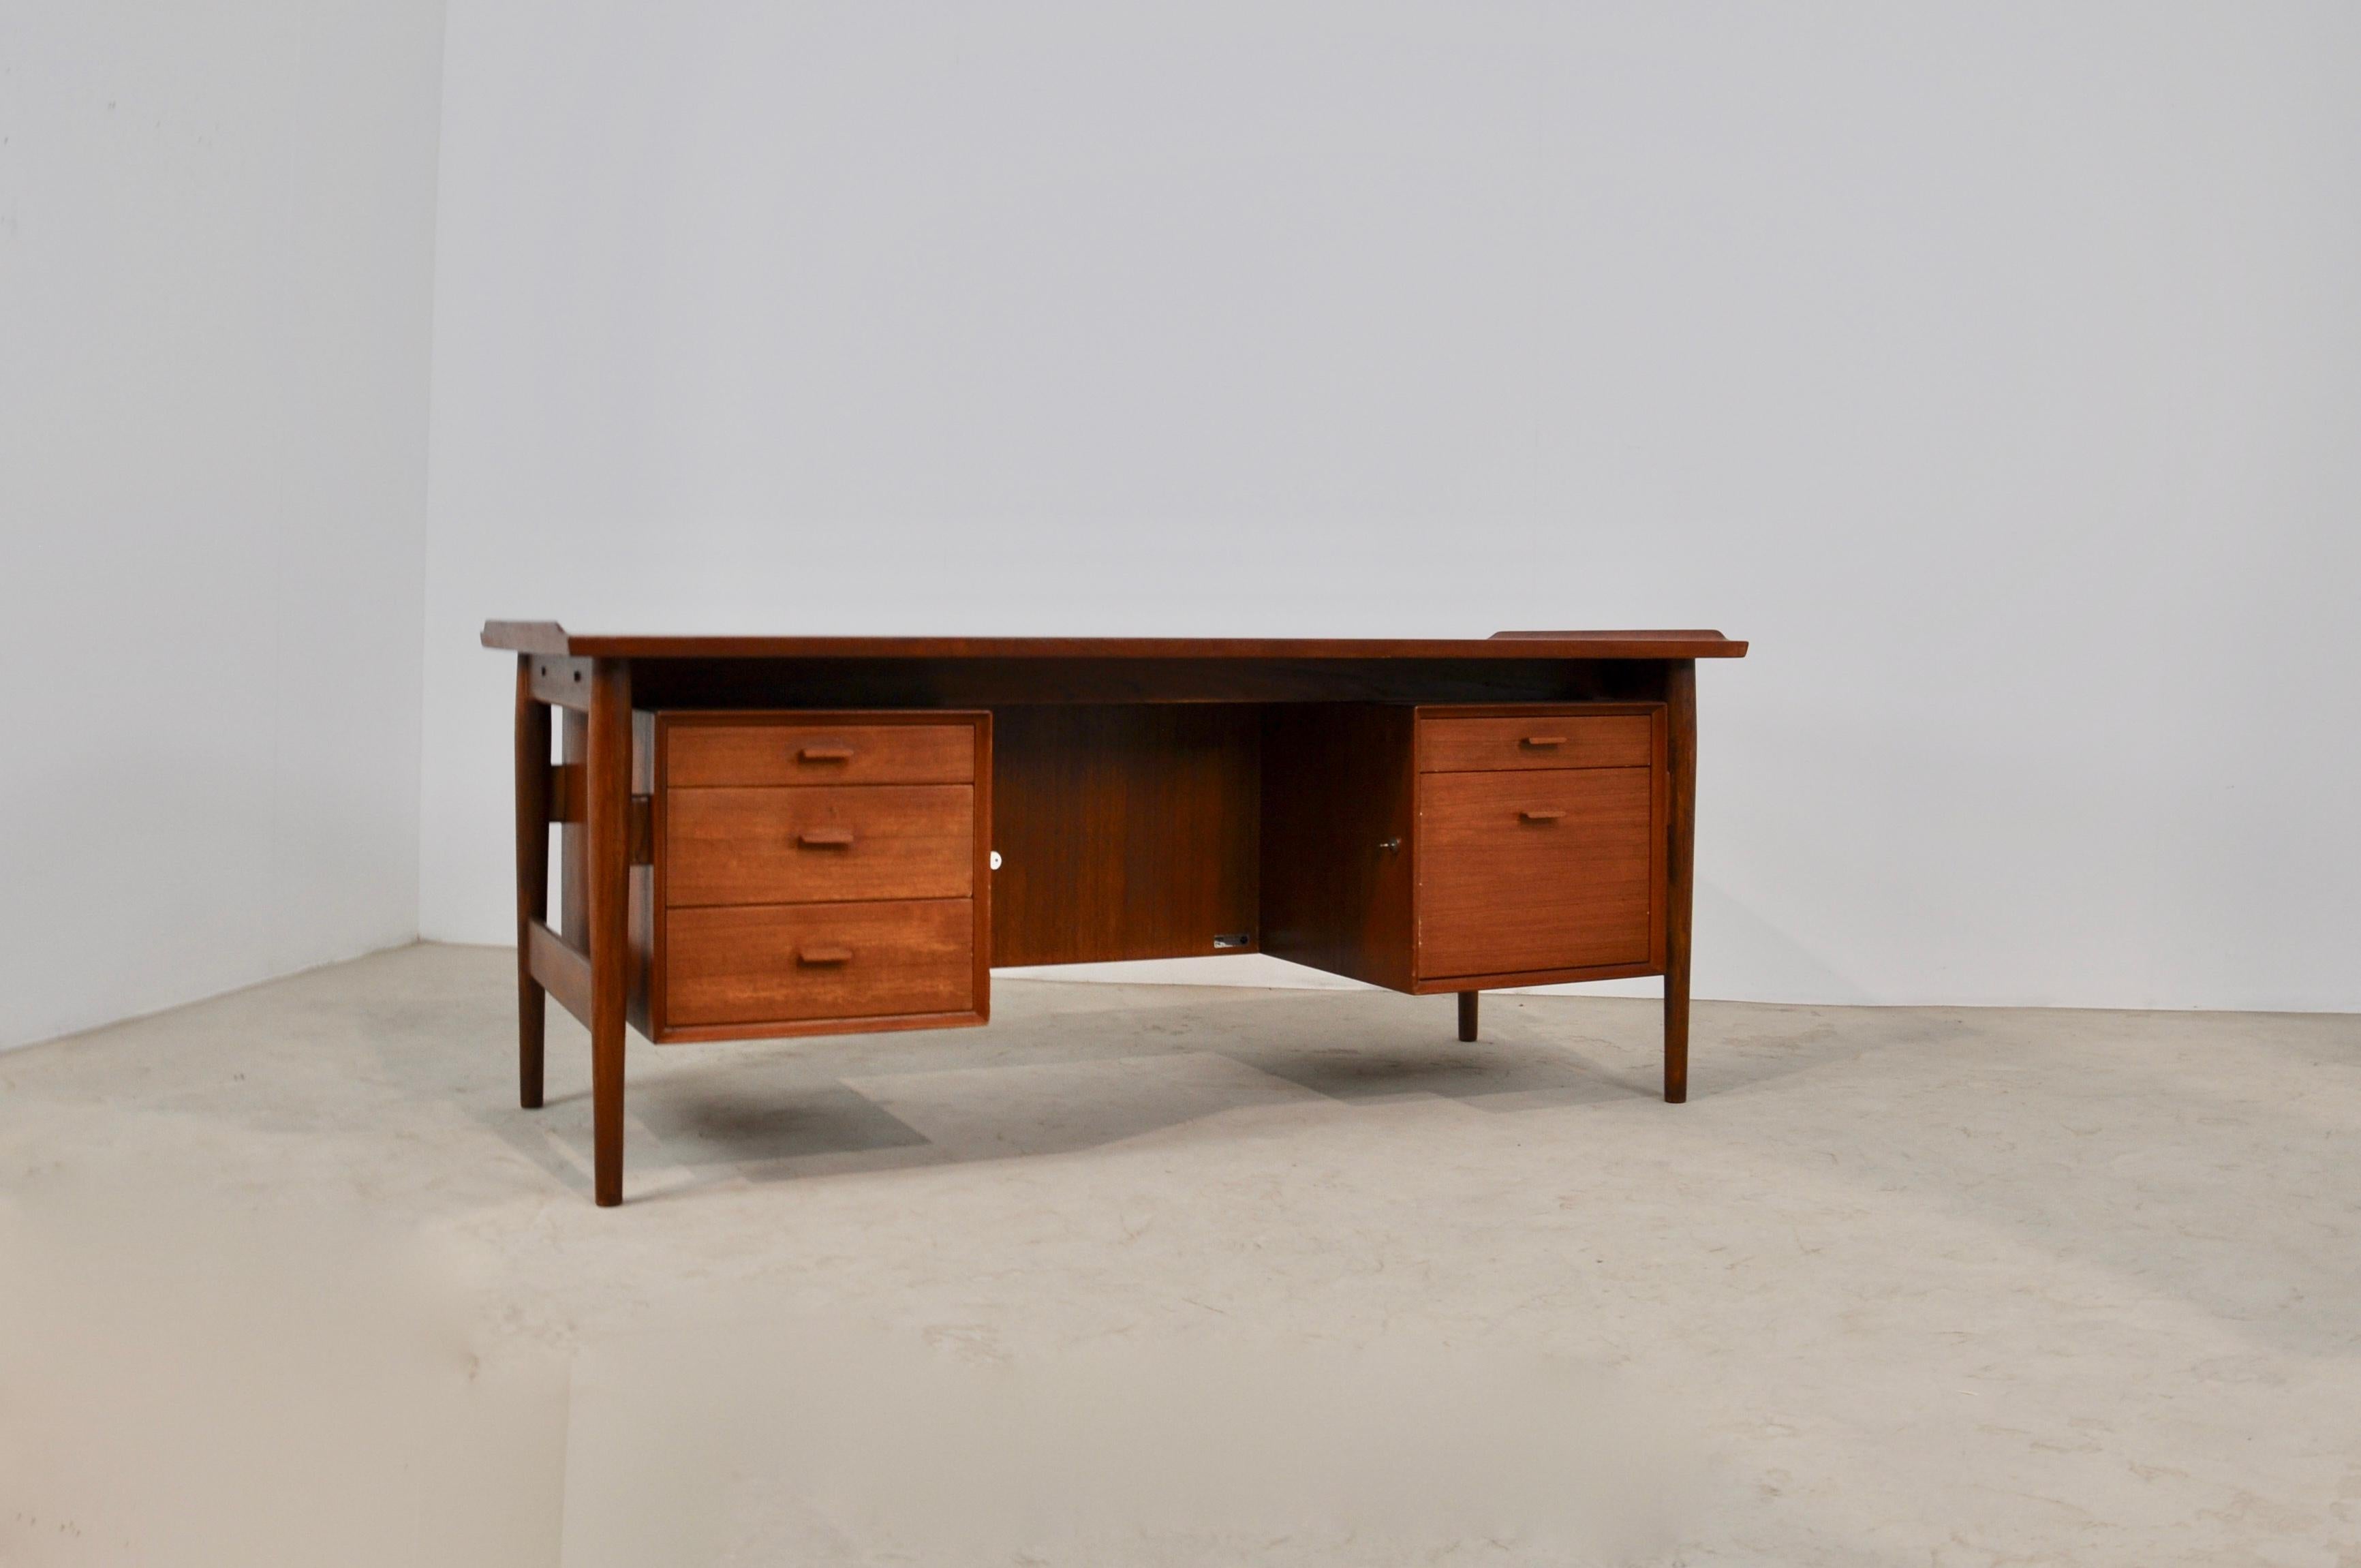 Teak desk with 5 drawers. 2 keys provided to close the desk. Wear and tear due to the time and age of the desk.